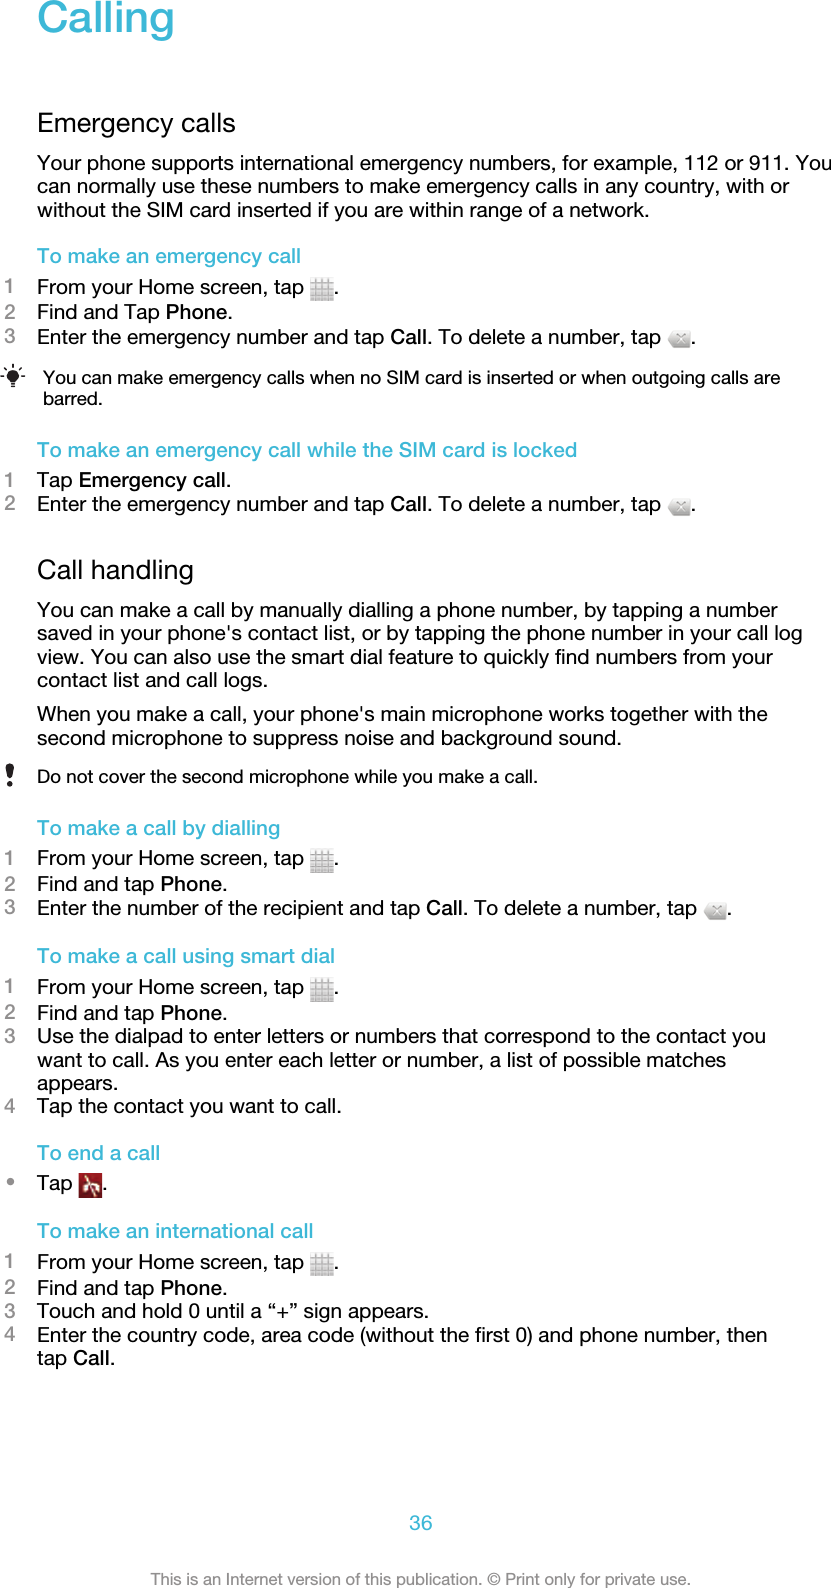 CallingEmergency callsYour phone supports international emergency numbers, for example, 112 or 911. Youcan normally use these numbers to make emergency calls in any country, with orwithout the SIM card inserted if you are within range of a network.To make an emergency call1From your Home screen, tap  .2Find and Tap Phone.3Enter the emergency number and tap Call. To delete a number, tap  .You can make emergency calls when no SIM card is inserted or when outgoing calls arebarred.To make an emergency call while the SIM card is locked1Tap Emergency call.2Enter the emergency number and tap Call. To delete a number, tap  .Call handlingYou can make a call by manually dialling a phone number, by tapping a numbersaved in your phone&apos;s contact list, or by tapping the phone number in your call logview. You can also use the smart dial feature to quickly find numbers from yourcontact list and call logs.When you make a call, your phone&apos;s main microphone works together with thesecond microphone to suppress noise and background sound.Do not cover the second microphone while you make a call.To make a call by dialling1From your Home screen, tap  .2Find and tap Phone.3Enter the number of the recipient and tap Call. To delete a number, tap  .To make a call using smart dial1From your Home screen, tap  .2Find and tap Phone.3Use the dialpad to enter letters or numbers that correspond to the contact youwant to call. As you enter each letter or number, a list of possible matchesappears.4Tap the contact you want to call.To end a call•Tap  .To make an international call1From your Home screen, tap  .2Find and tap Phone.3Touch and hold 0 until a “+” sign appears.4Enter the country code, area code (without the first 0) and phone number, thentap Call.36This is an Internet version of this publication. © Print only for private use.